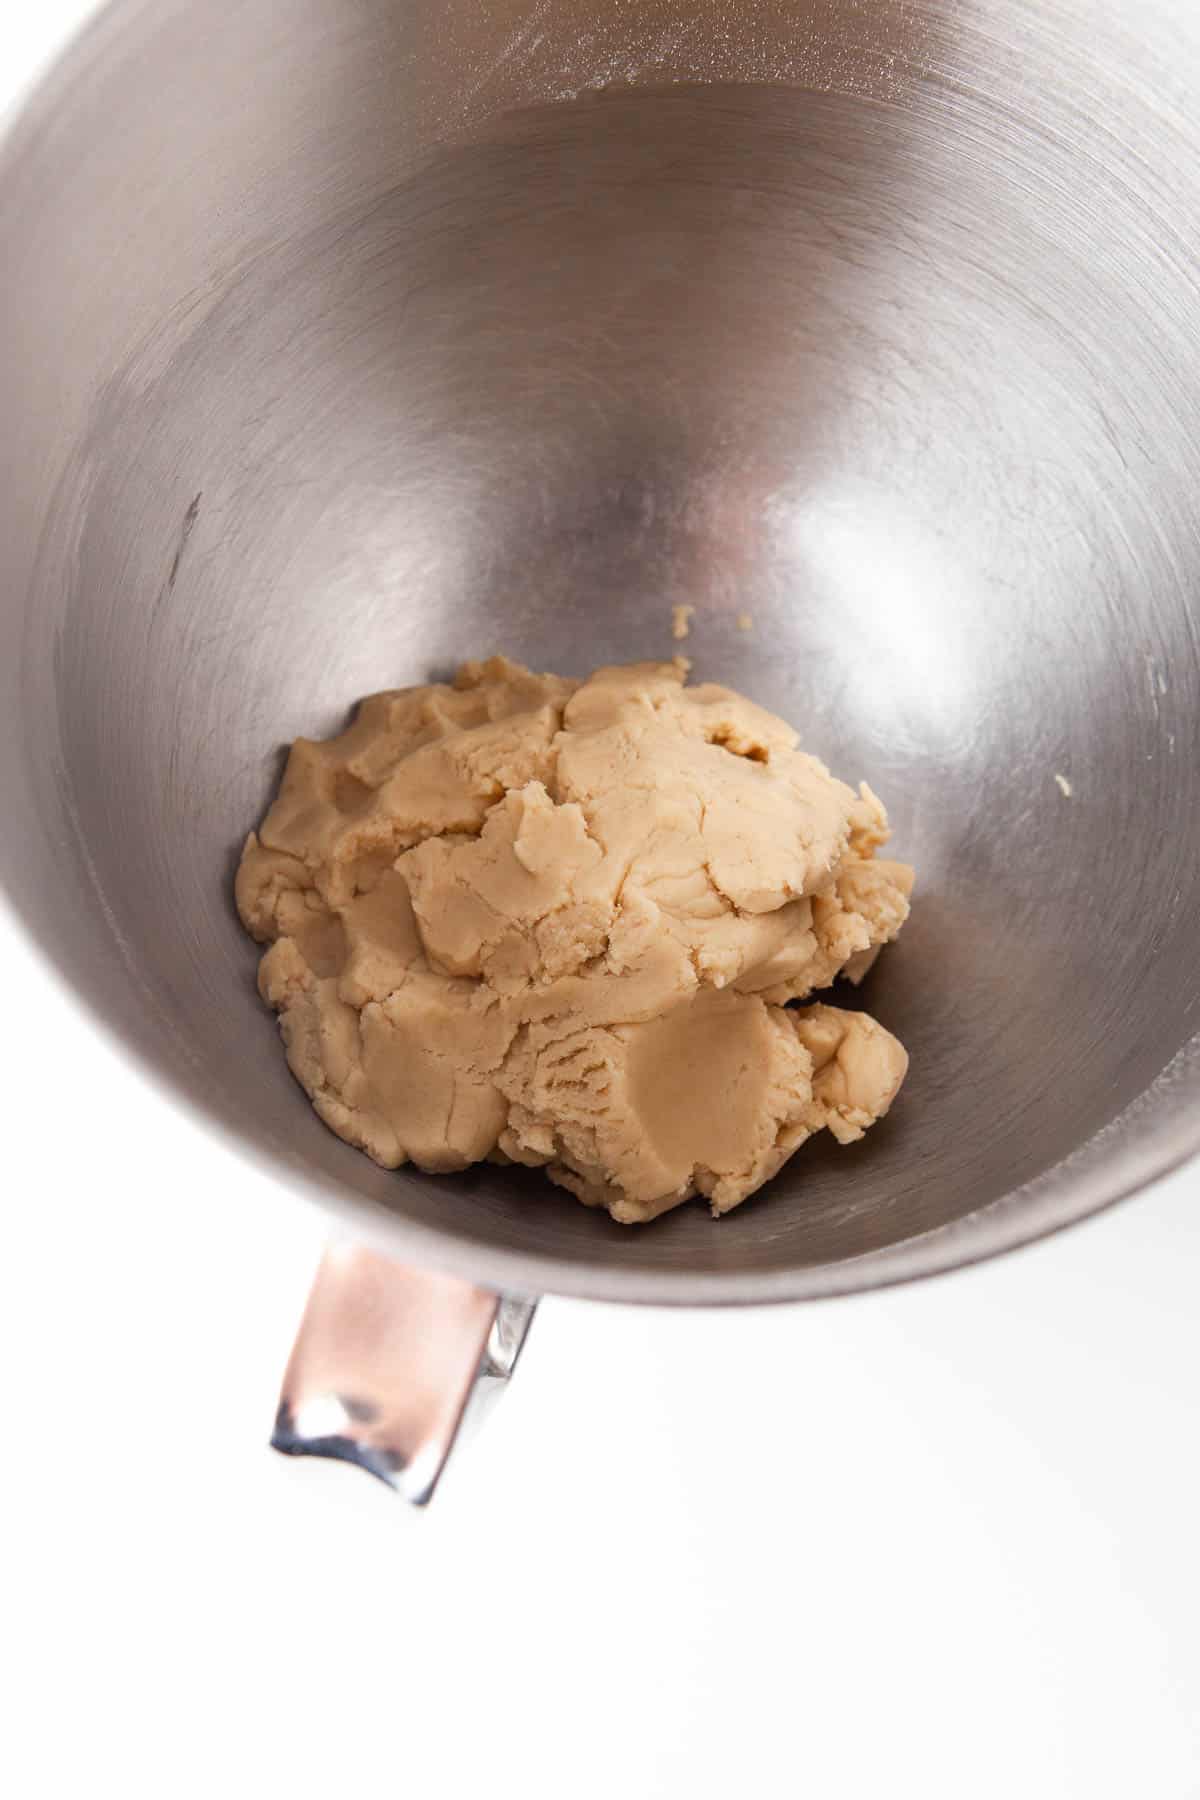 Peanut butter cookie dough with dulce de leche cookies in a mixing bowl.